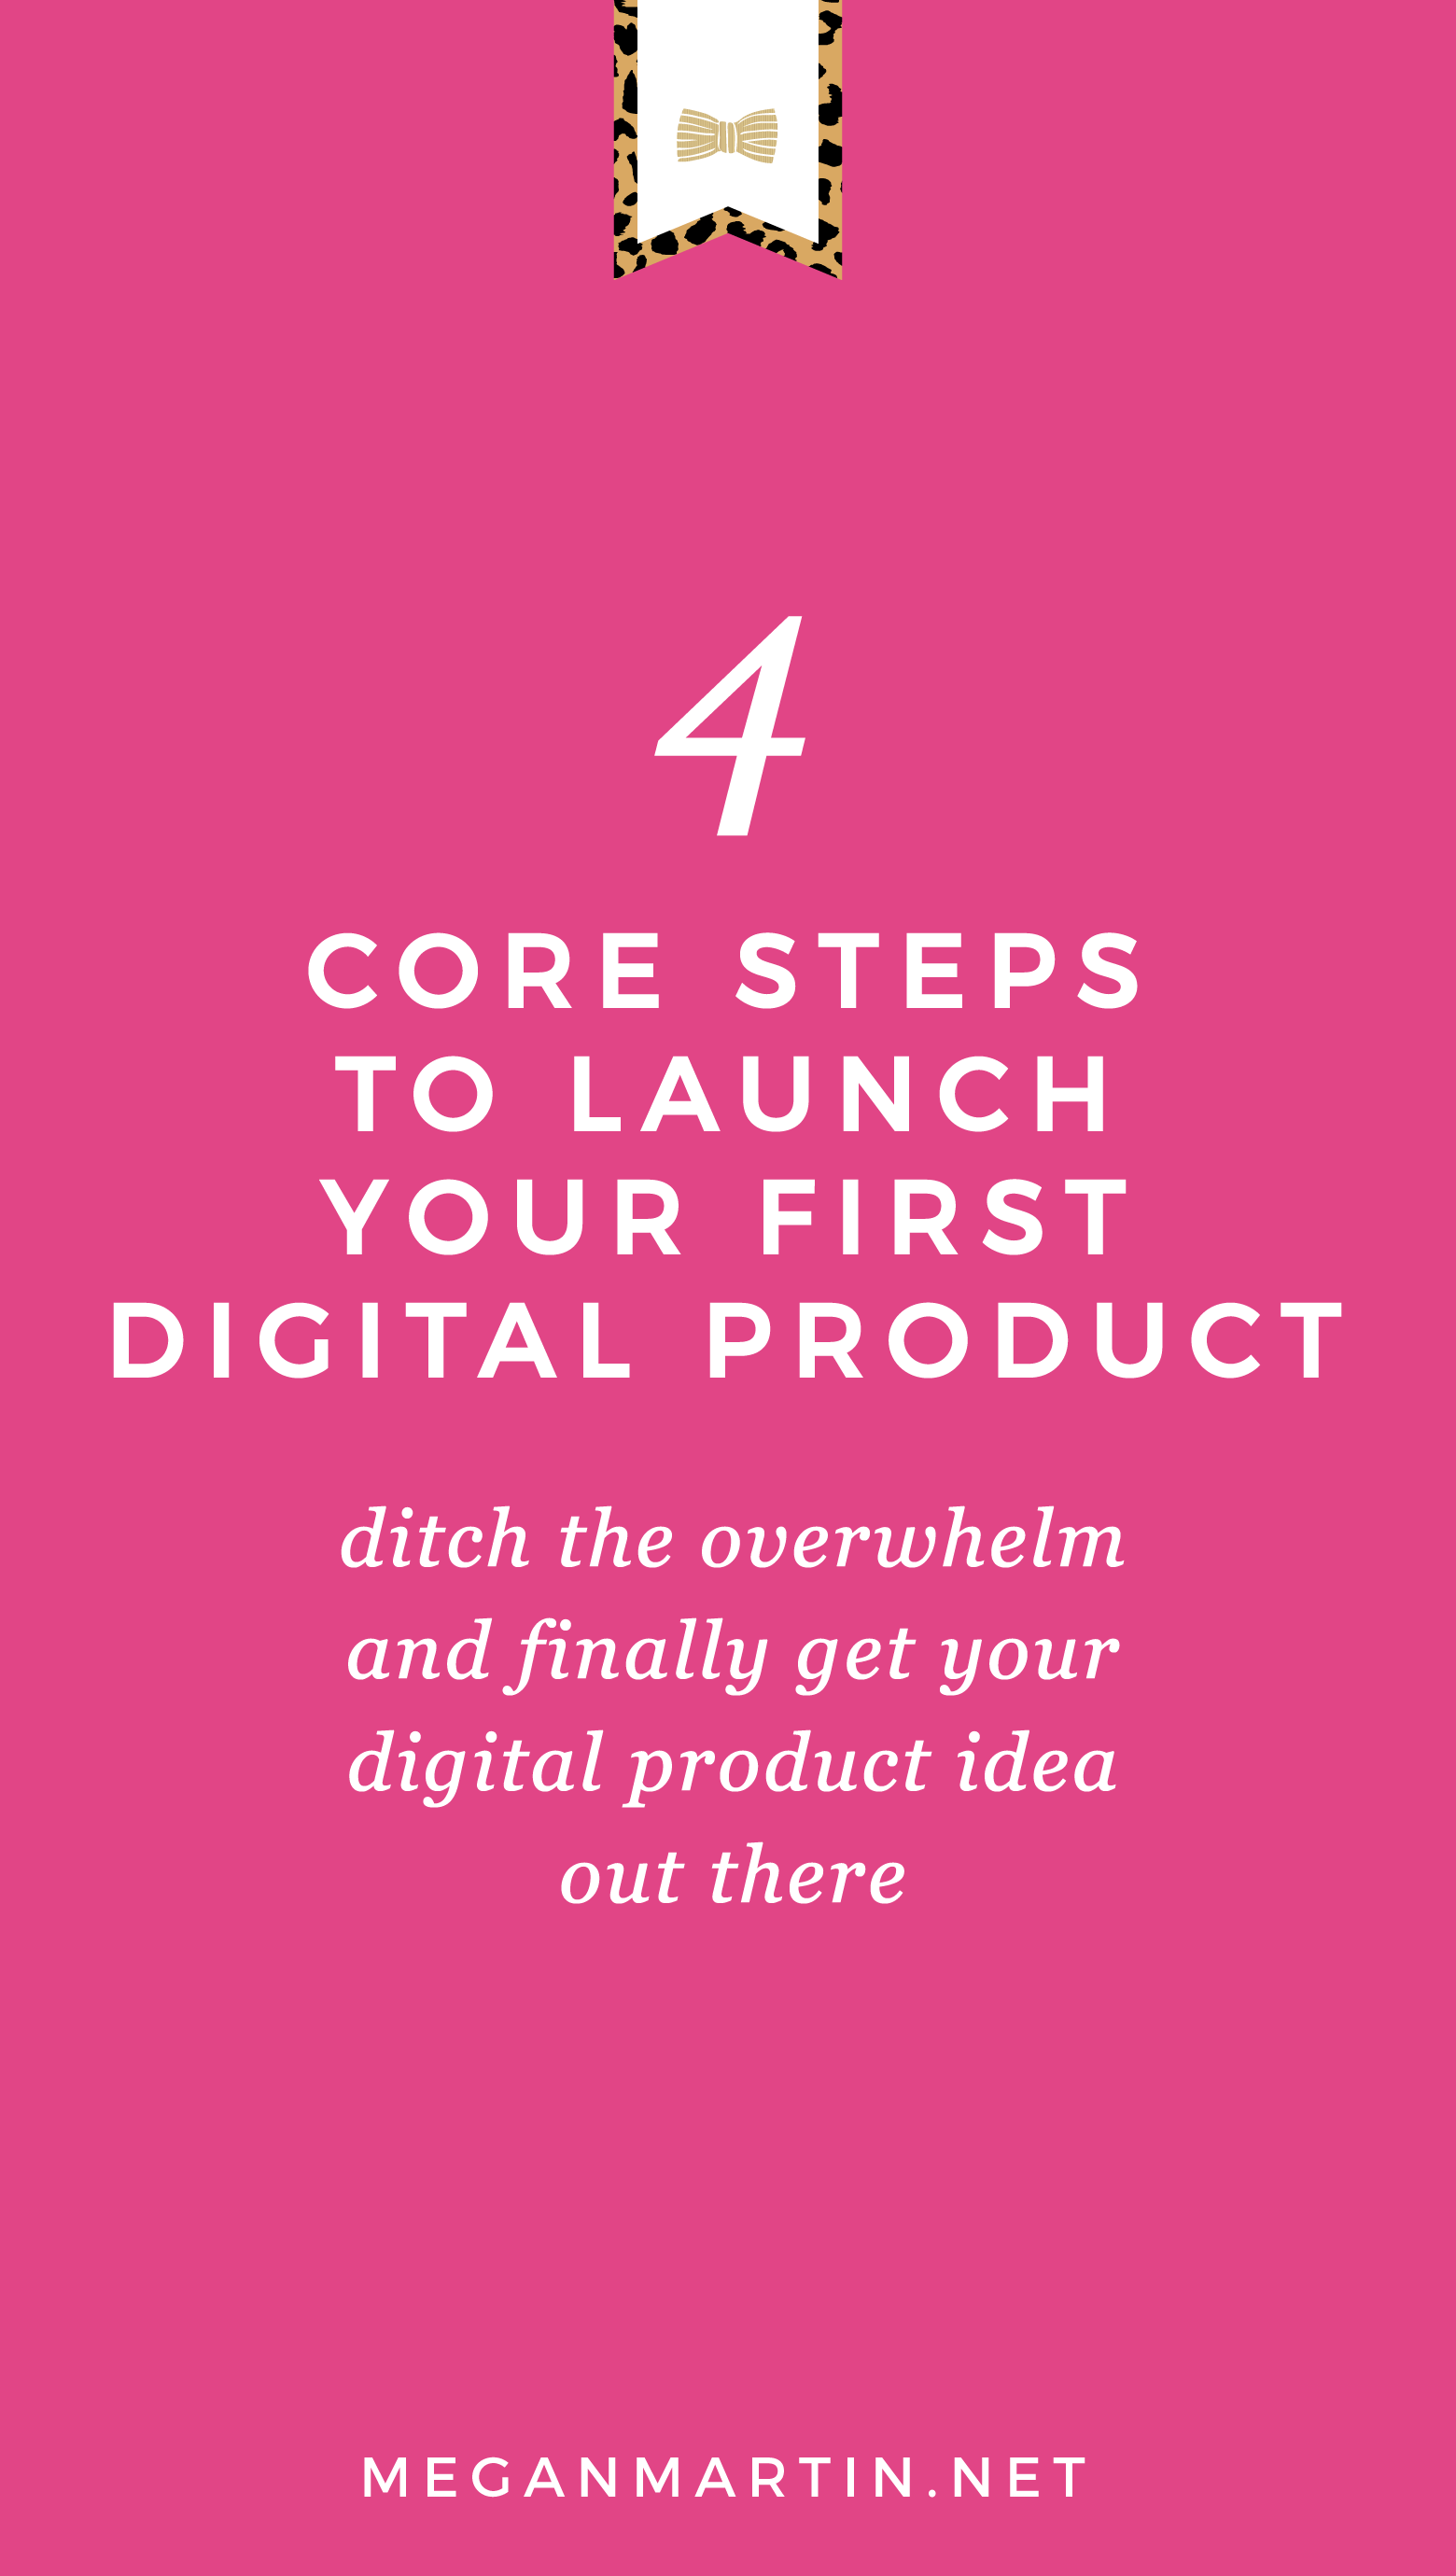 4 Core Steps to Launch your First Digital Product - Join the Digital Lab All Access community and grow your digital business togther!